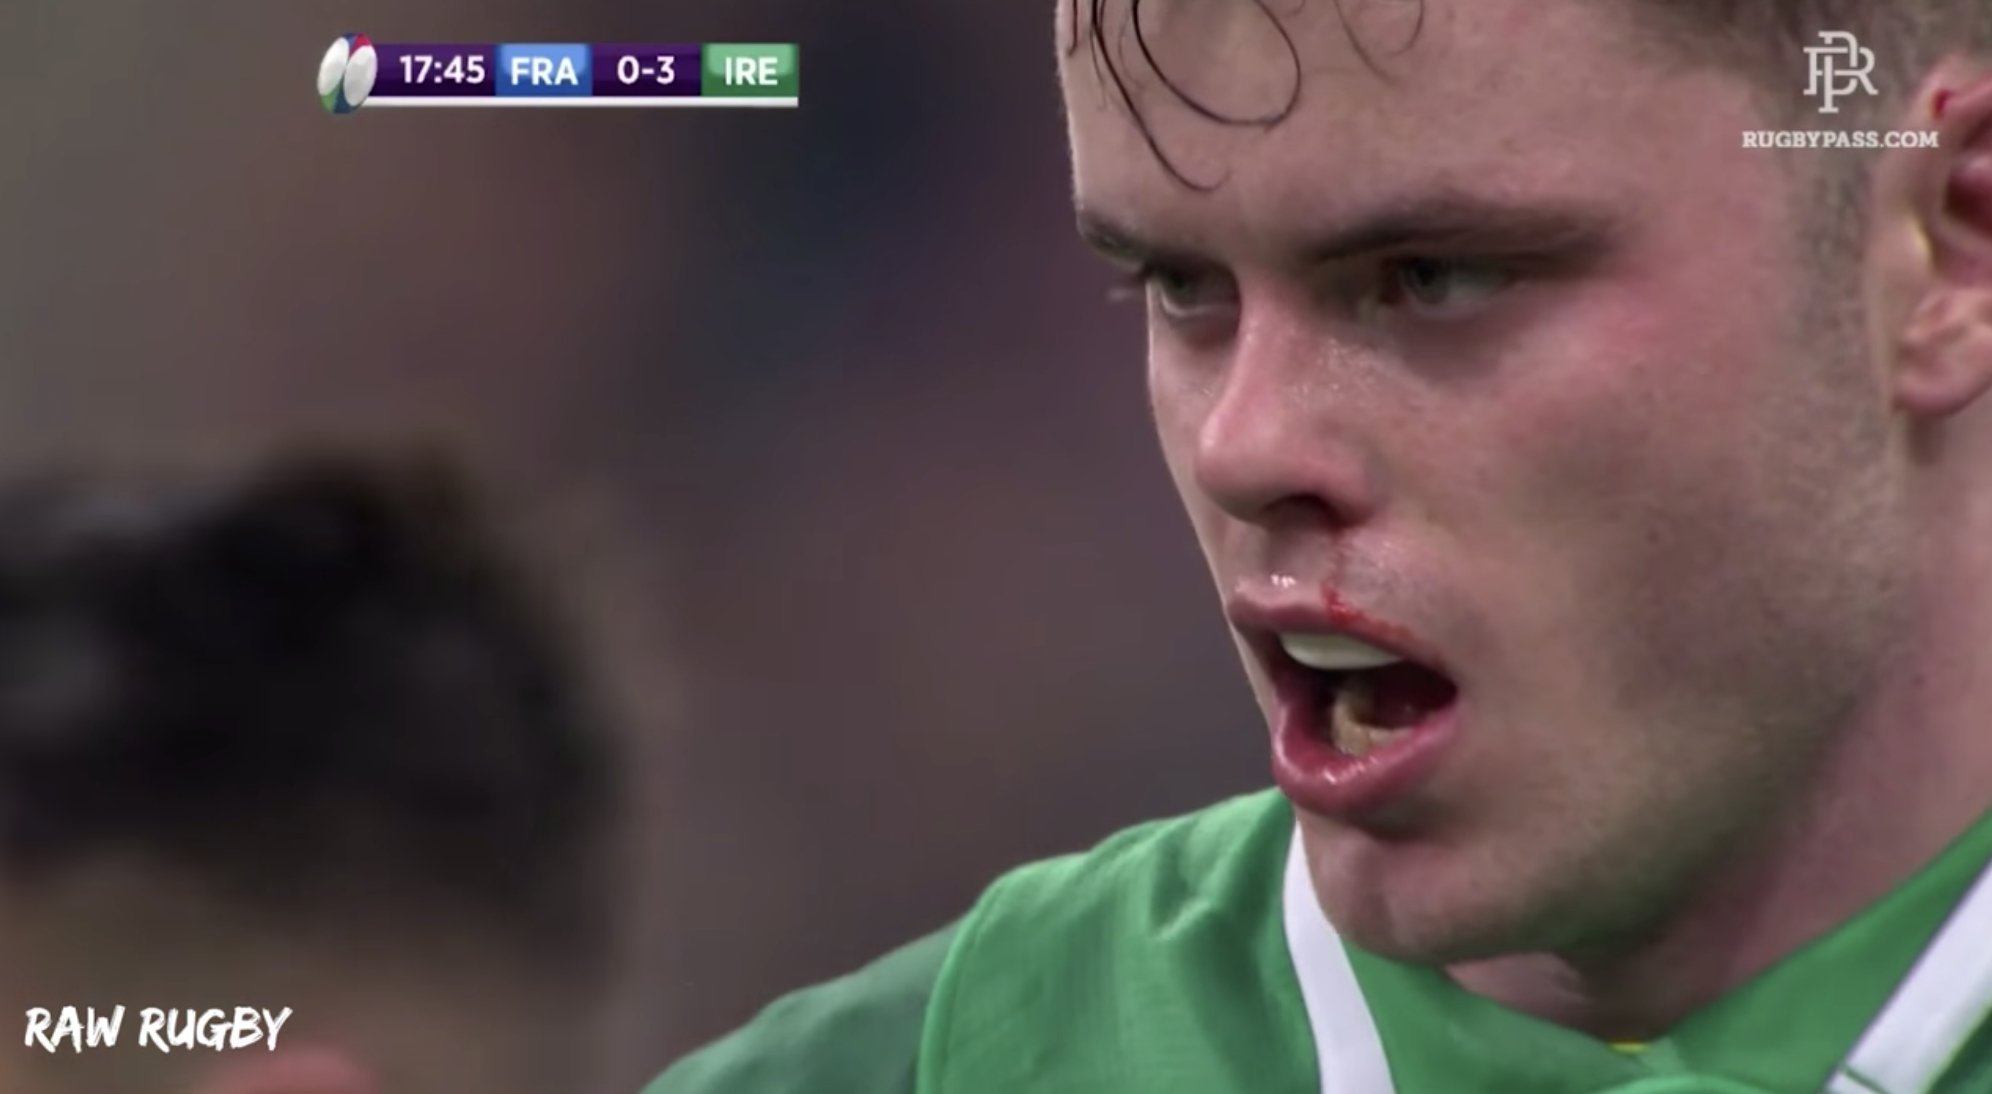 WATCH: Raw Rugby have released their WORLD XV video and it's utterly dominated by one team